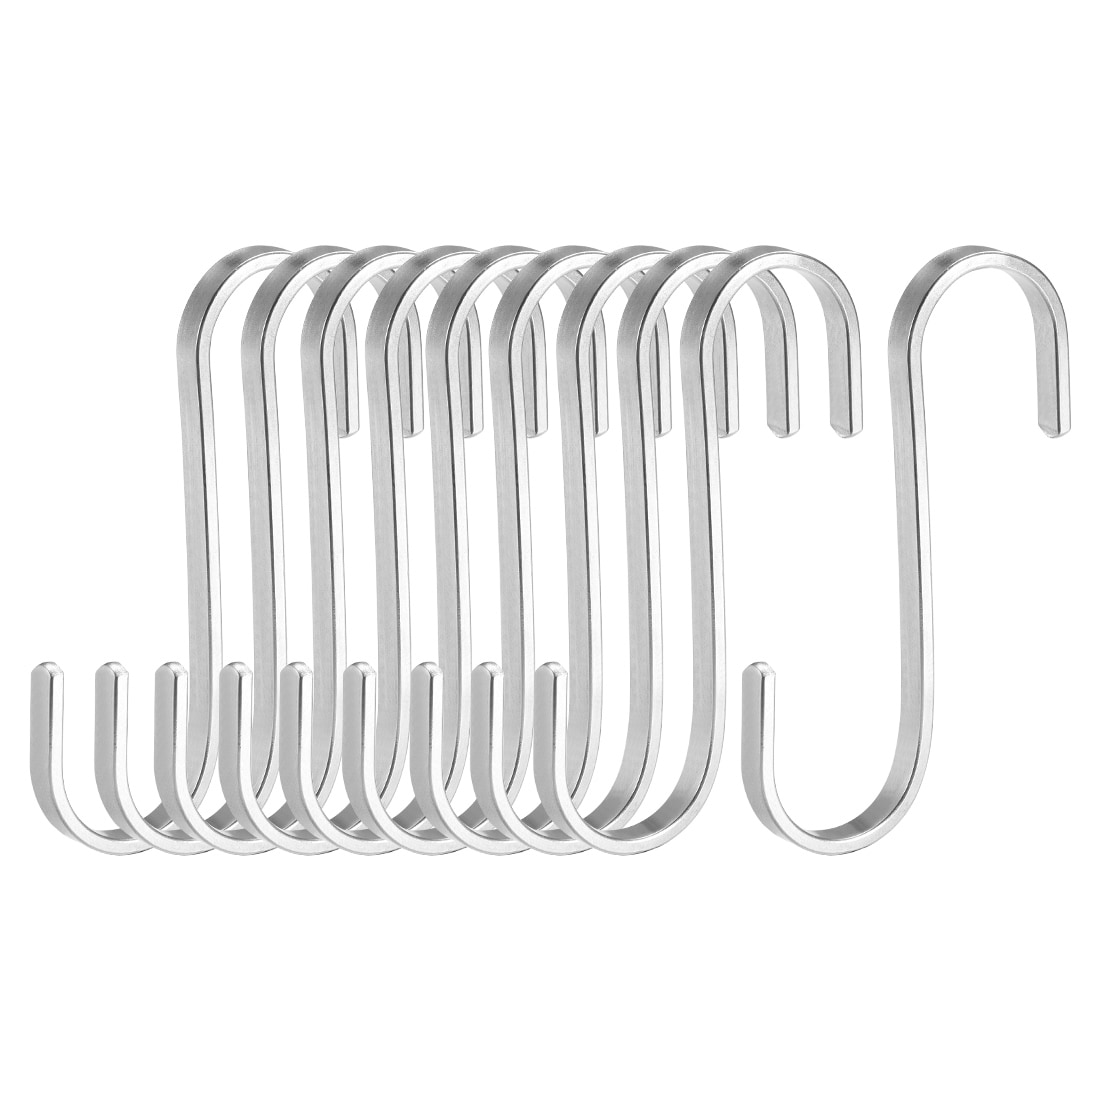 Stainless Steel S Hooks 3 Flat S Shaped Hangers Multiple Uses 10pcs -  Silver - 3 x 0.95 x 0.17(L*W*H) 10pcs - Bed Bath & Beyond - 35440861